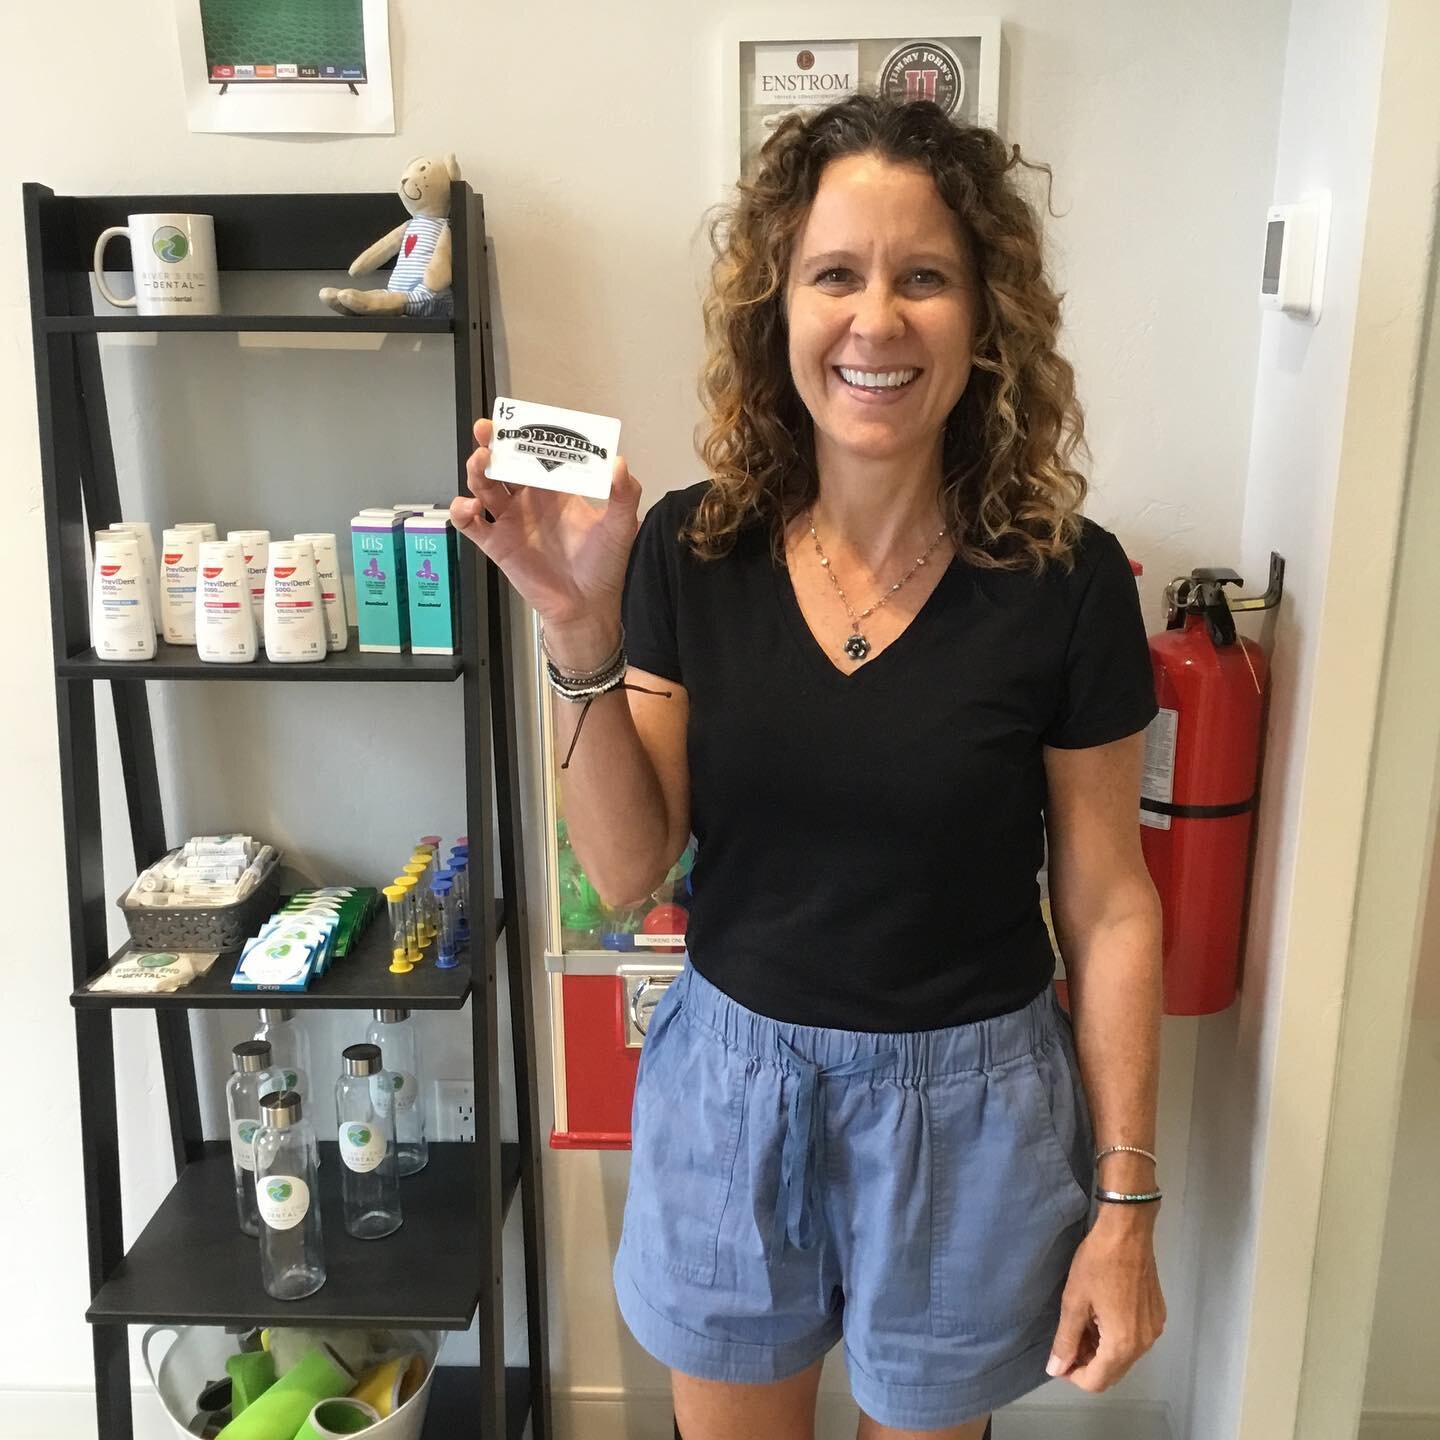 Shoutout to @sudsbrothersfruita and our amazing new patients! Thanks for joining us at River&rsquo;s End Dental.
#gofruita #westslopebestslope #fruitacolorado